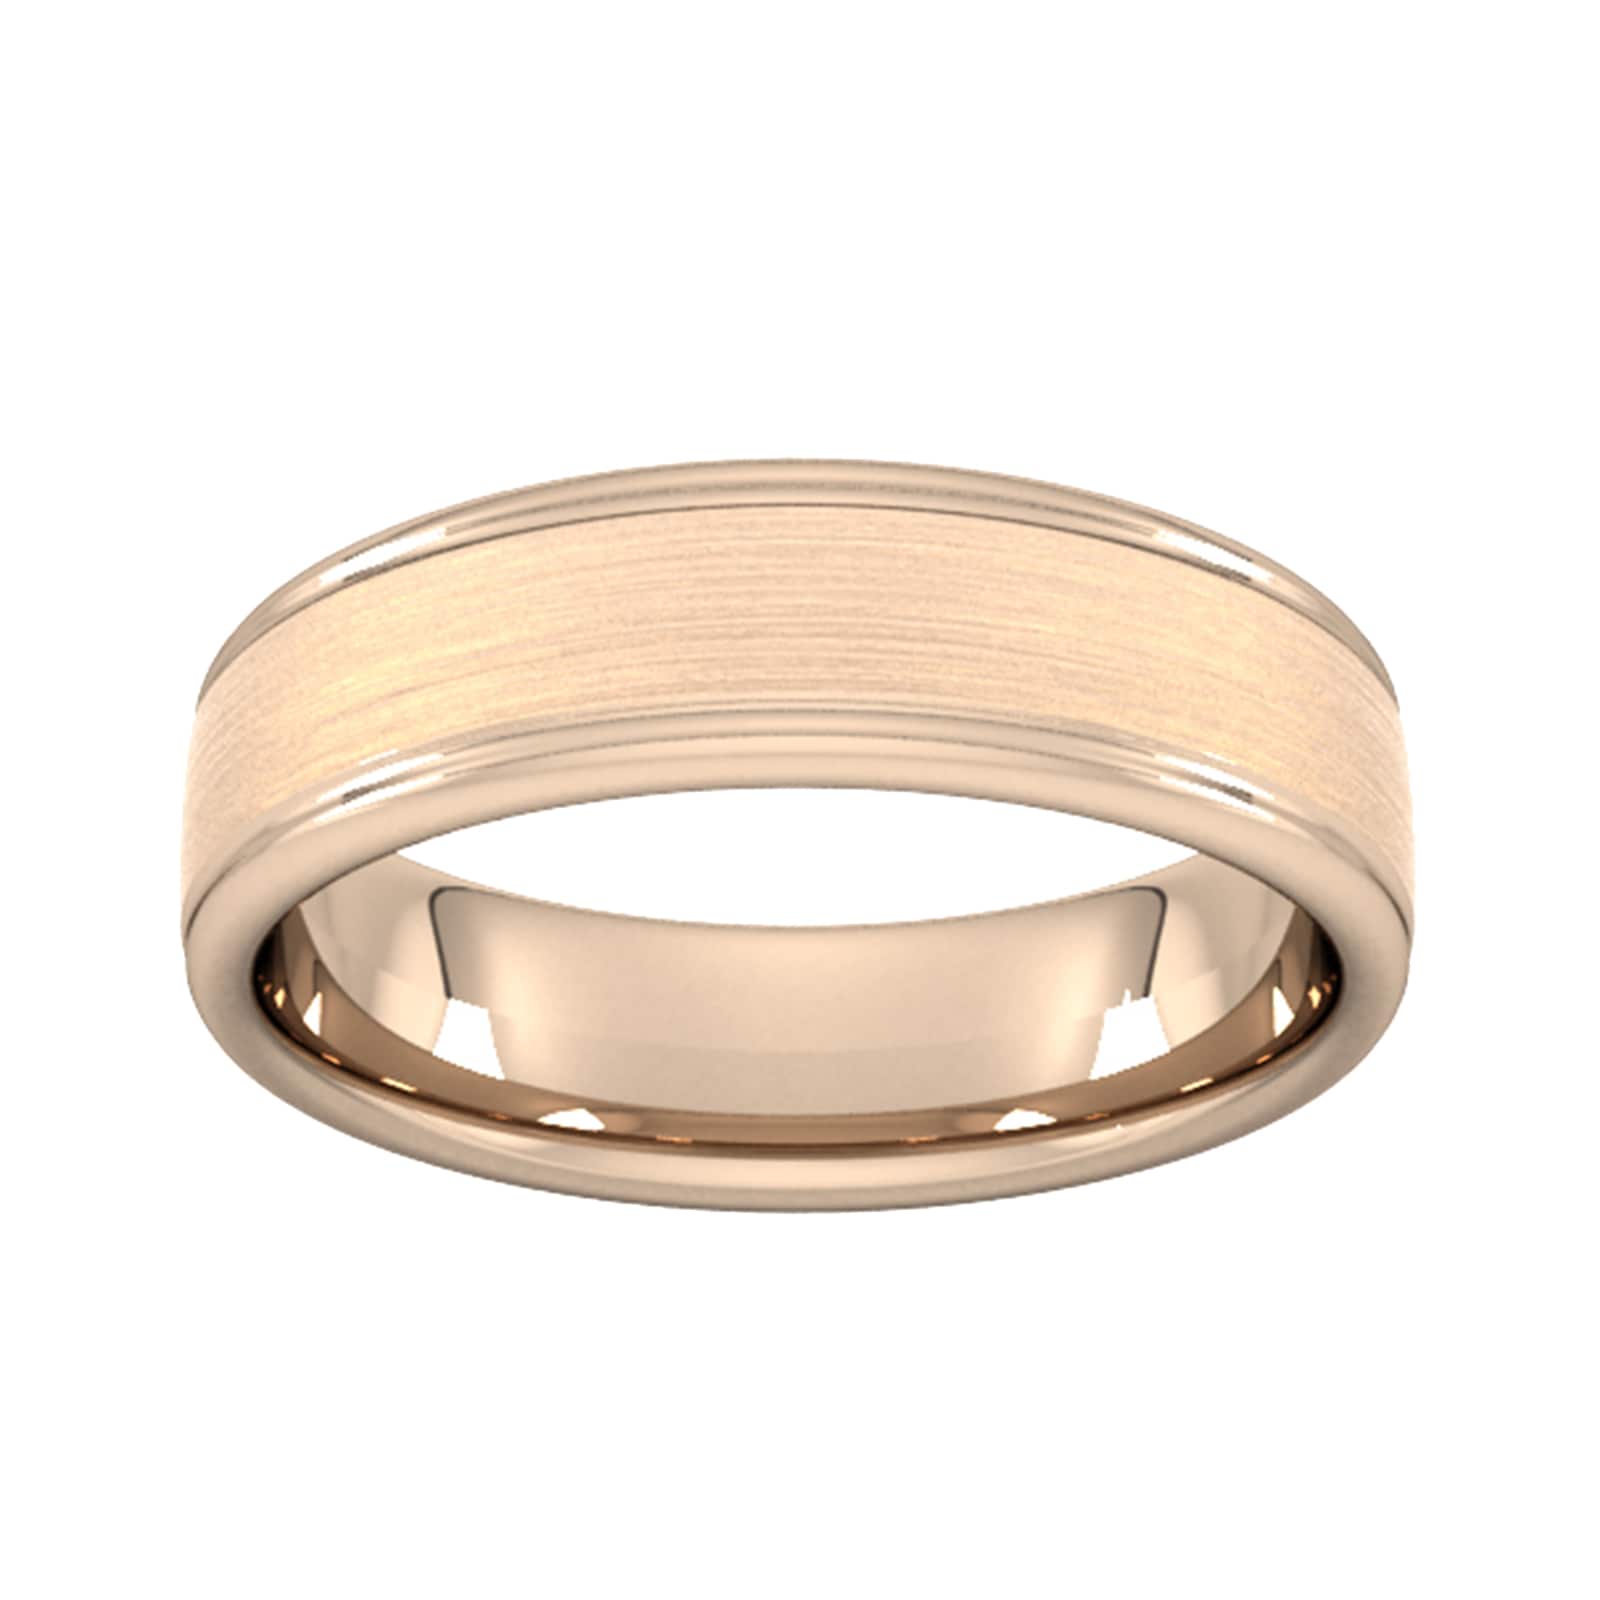 6mm Slight Court Extra Heavy Matt Centre With Grooves Wedding Ring In 18 Carat Rose Gold - Ring Size P